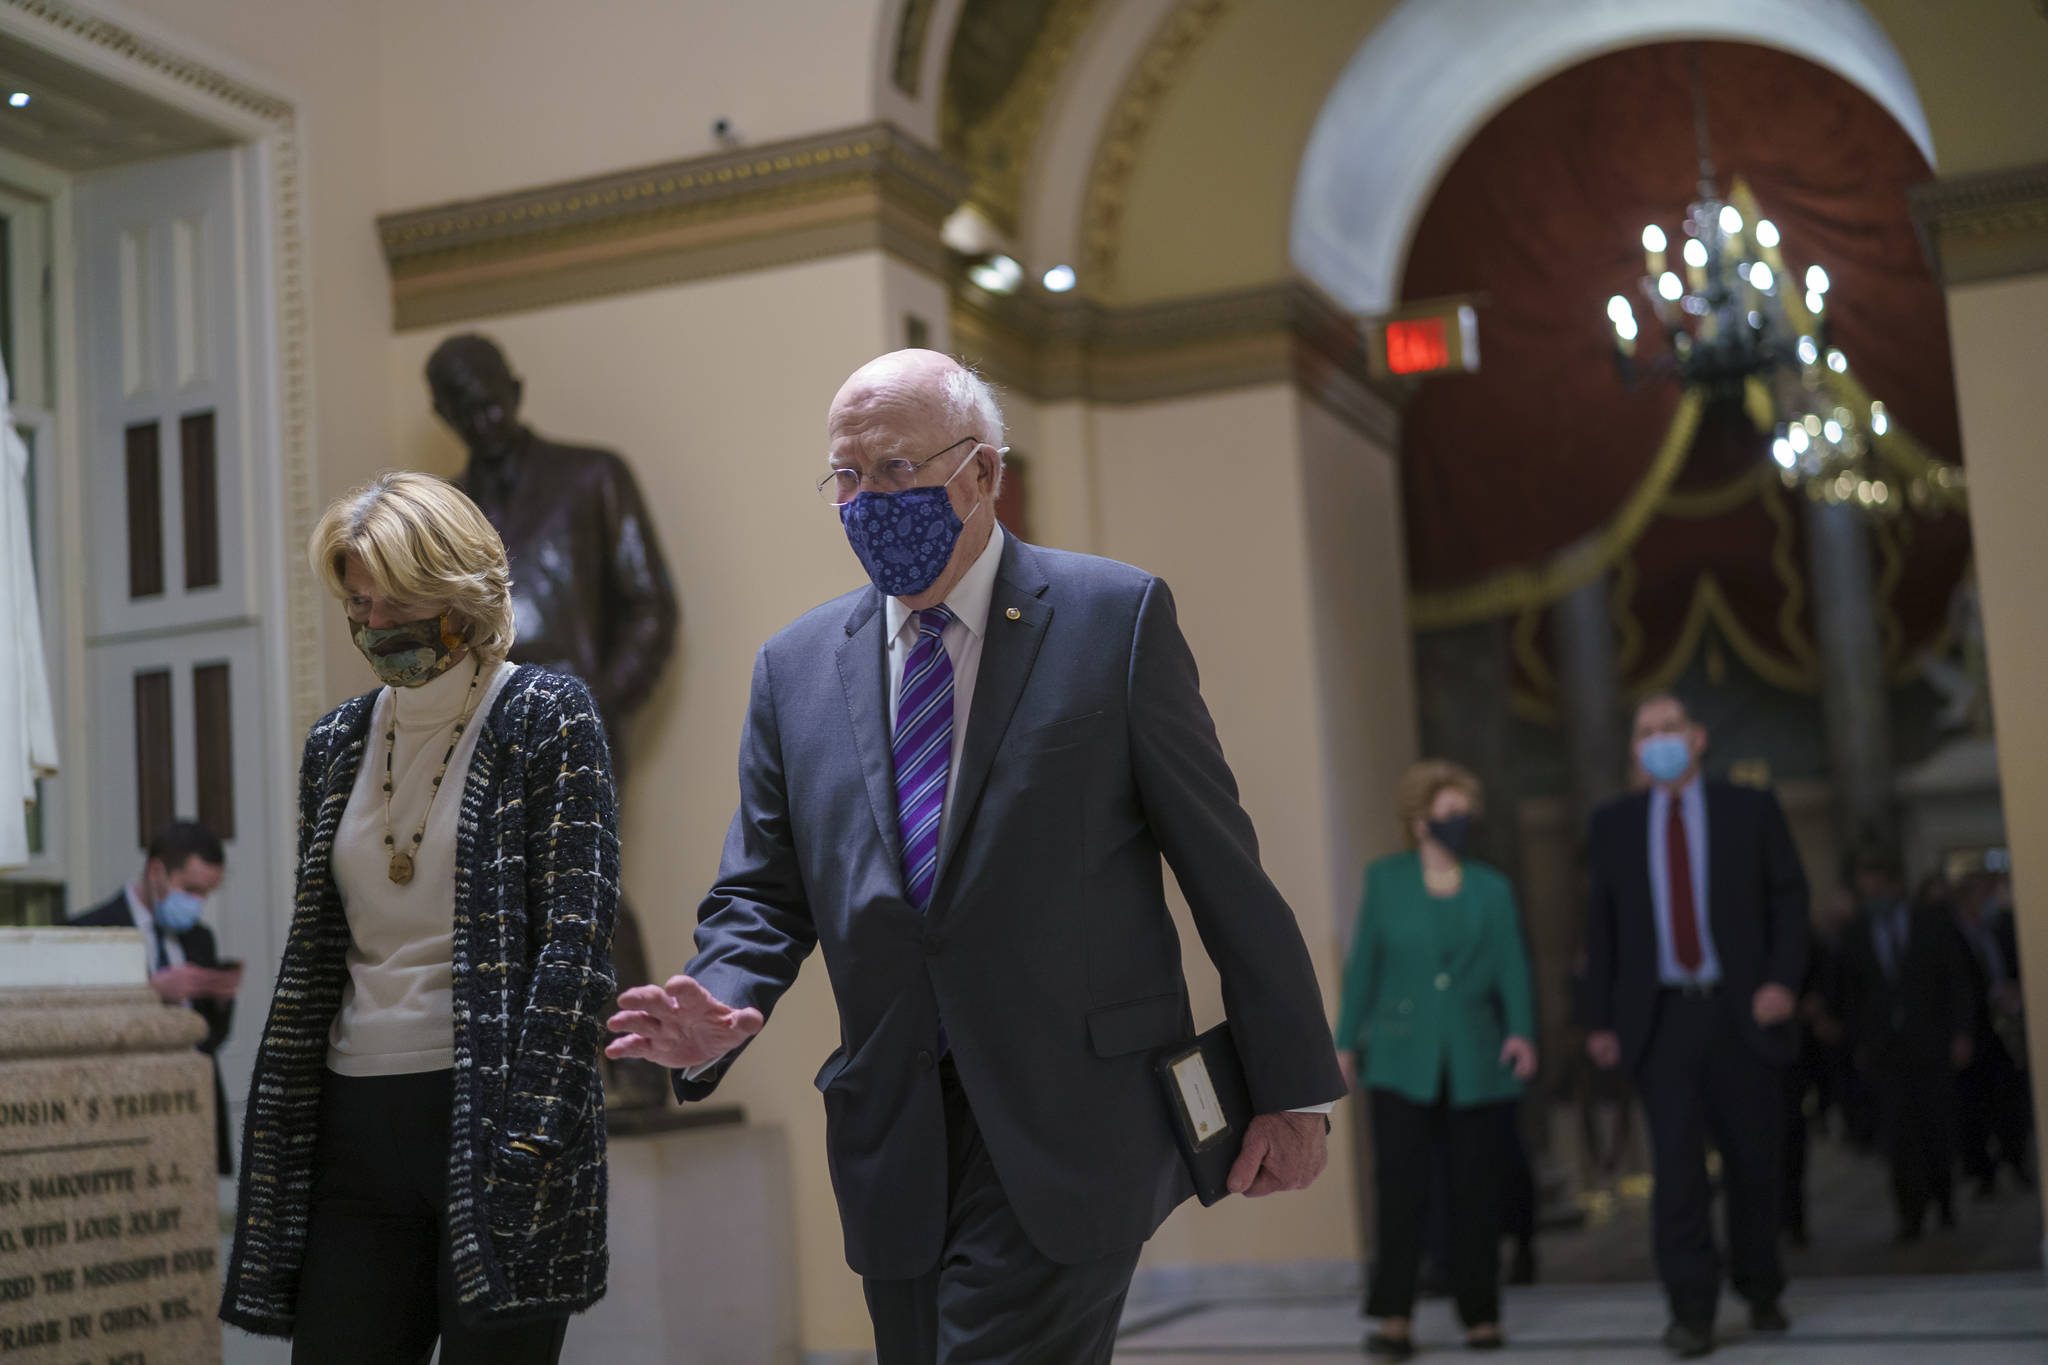 After violent protesters loyal to President Donald Trump stormed the U.S. Capitol today, Sen. Lisa Murkowski, R-Alaska, left, and Sen. Patrick Leahy, D-Vt., join other senators as they return to the House chamber to continue the joint session of the House and Senate and count the Electoral College votes cast in November's election, at the Capitol in Washington, Wednesday, Jan. 6, 2021. (AP Photo/J. Scott Applewhite)